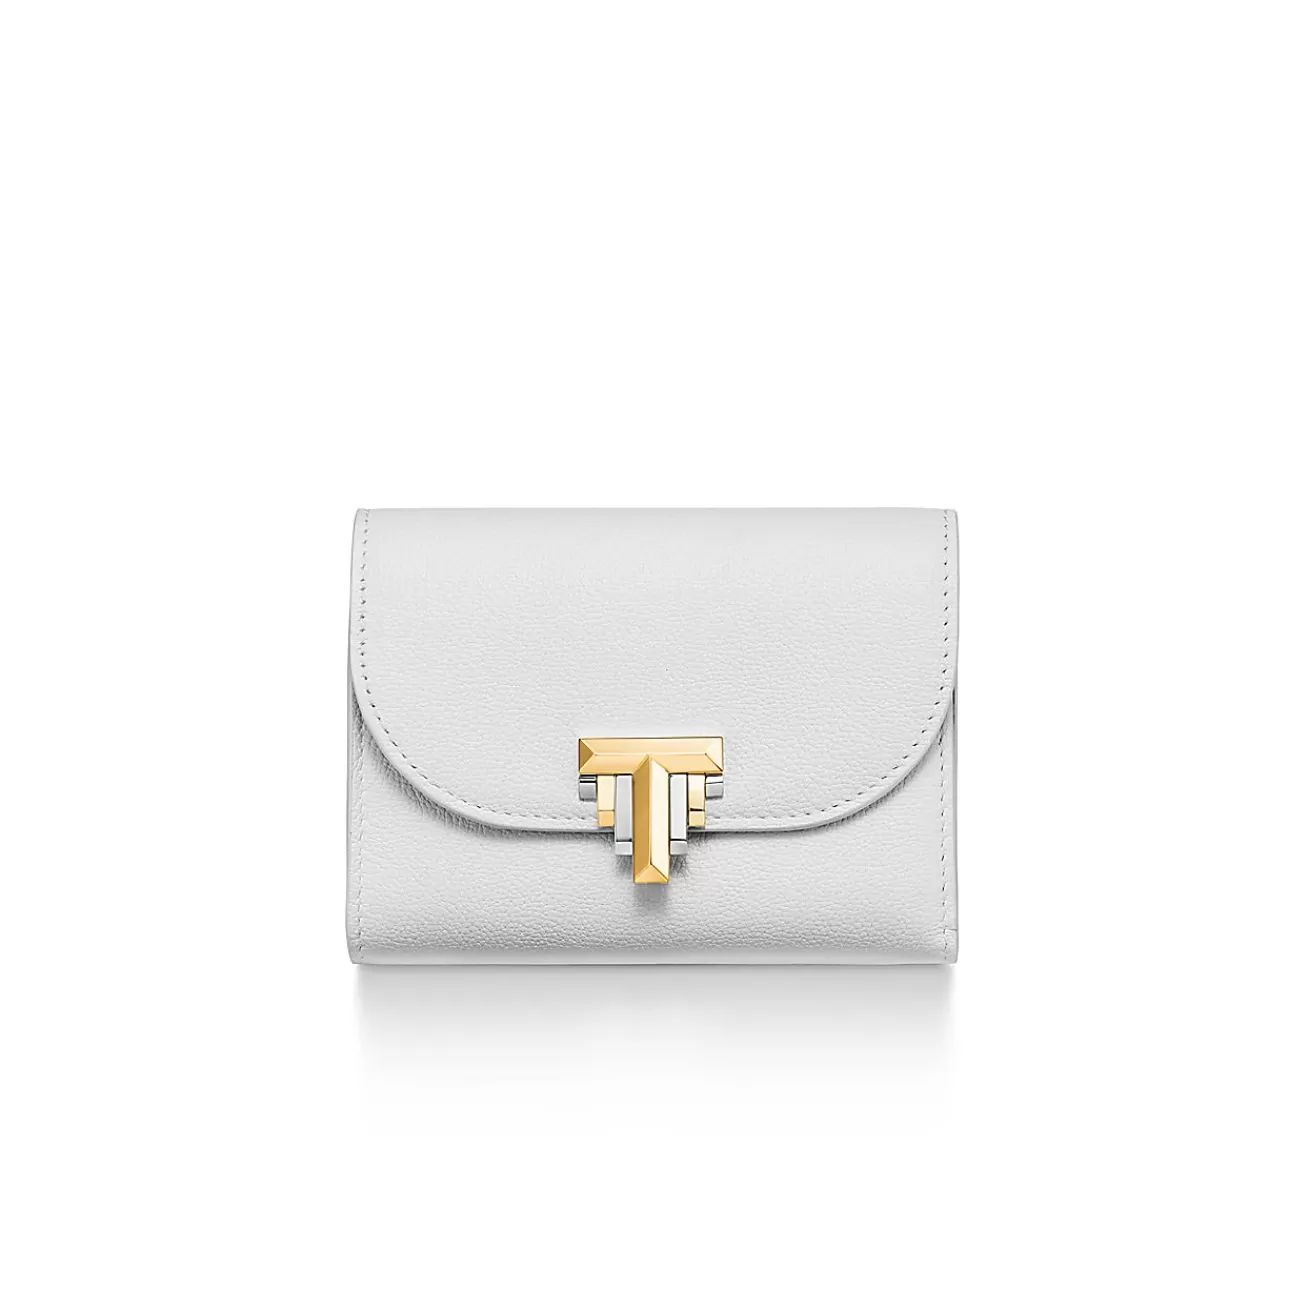 Tiffany & Co. Tiffany T Deco Small Wallet in White Leather | ^Women Small Leather Goods | Women's Accessories